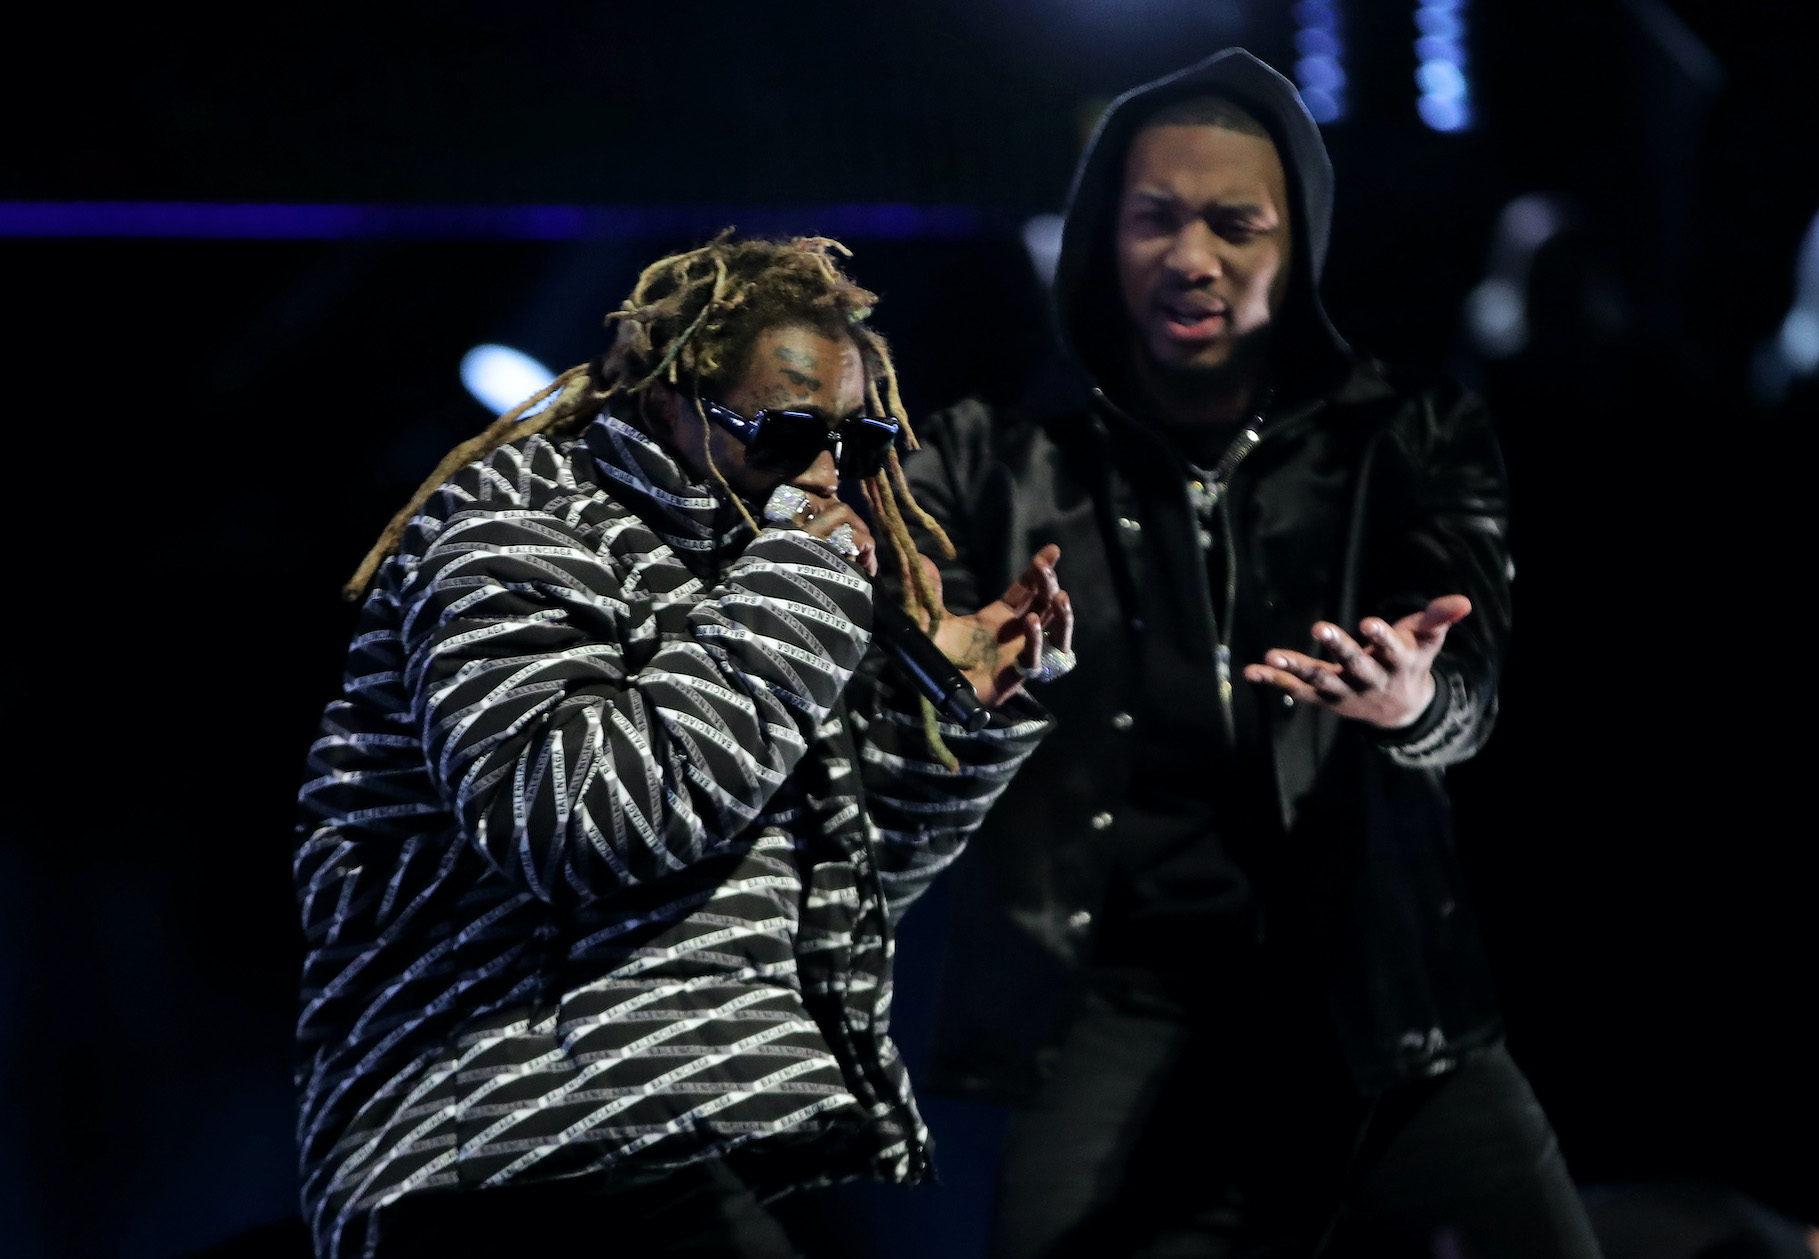 Lil Wayne performs with Damian Lillard in the 2020 NBA All-Star - AT&T Slam Dunk Contest during State Farm All-Star Saturday Night at the United Center